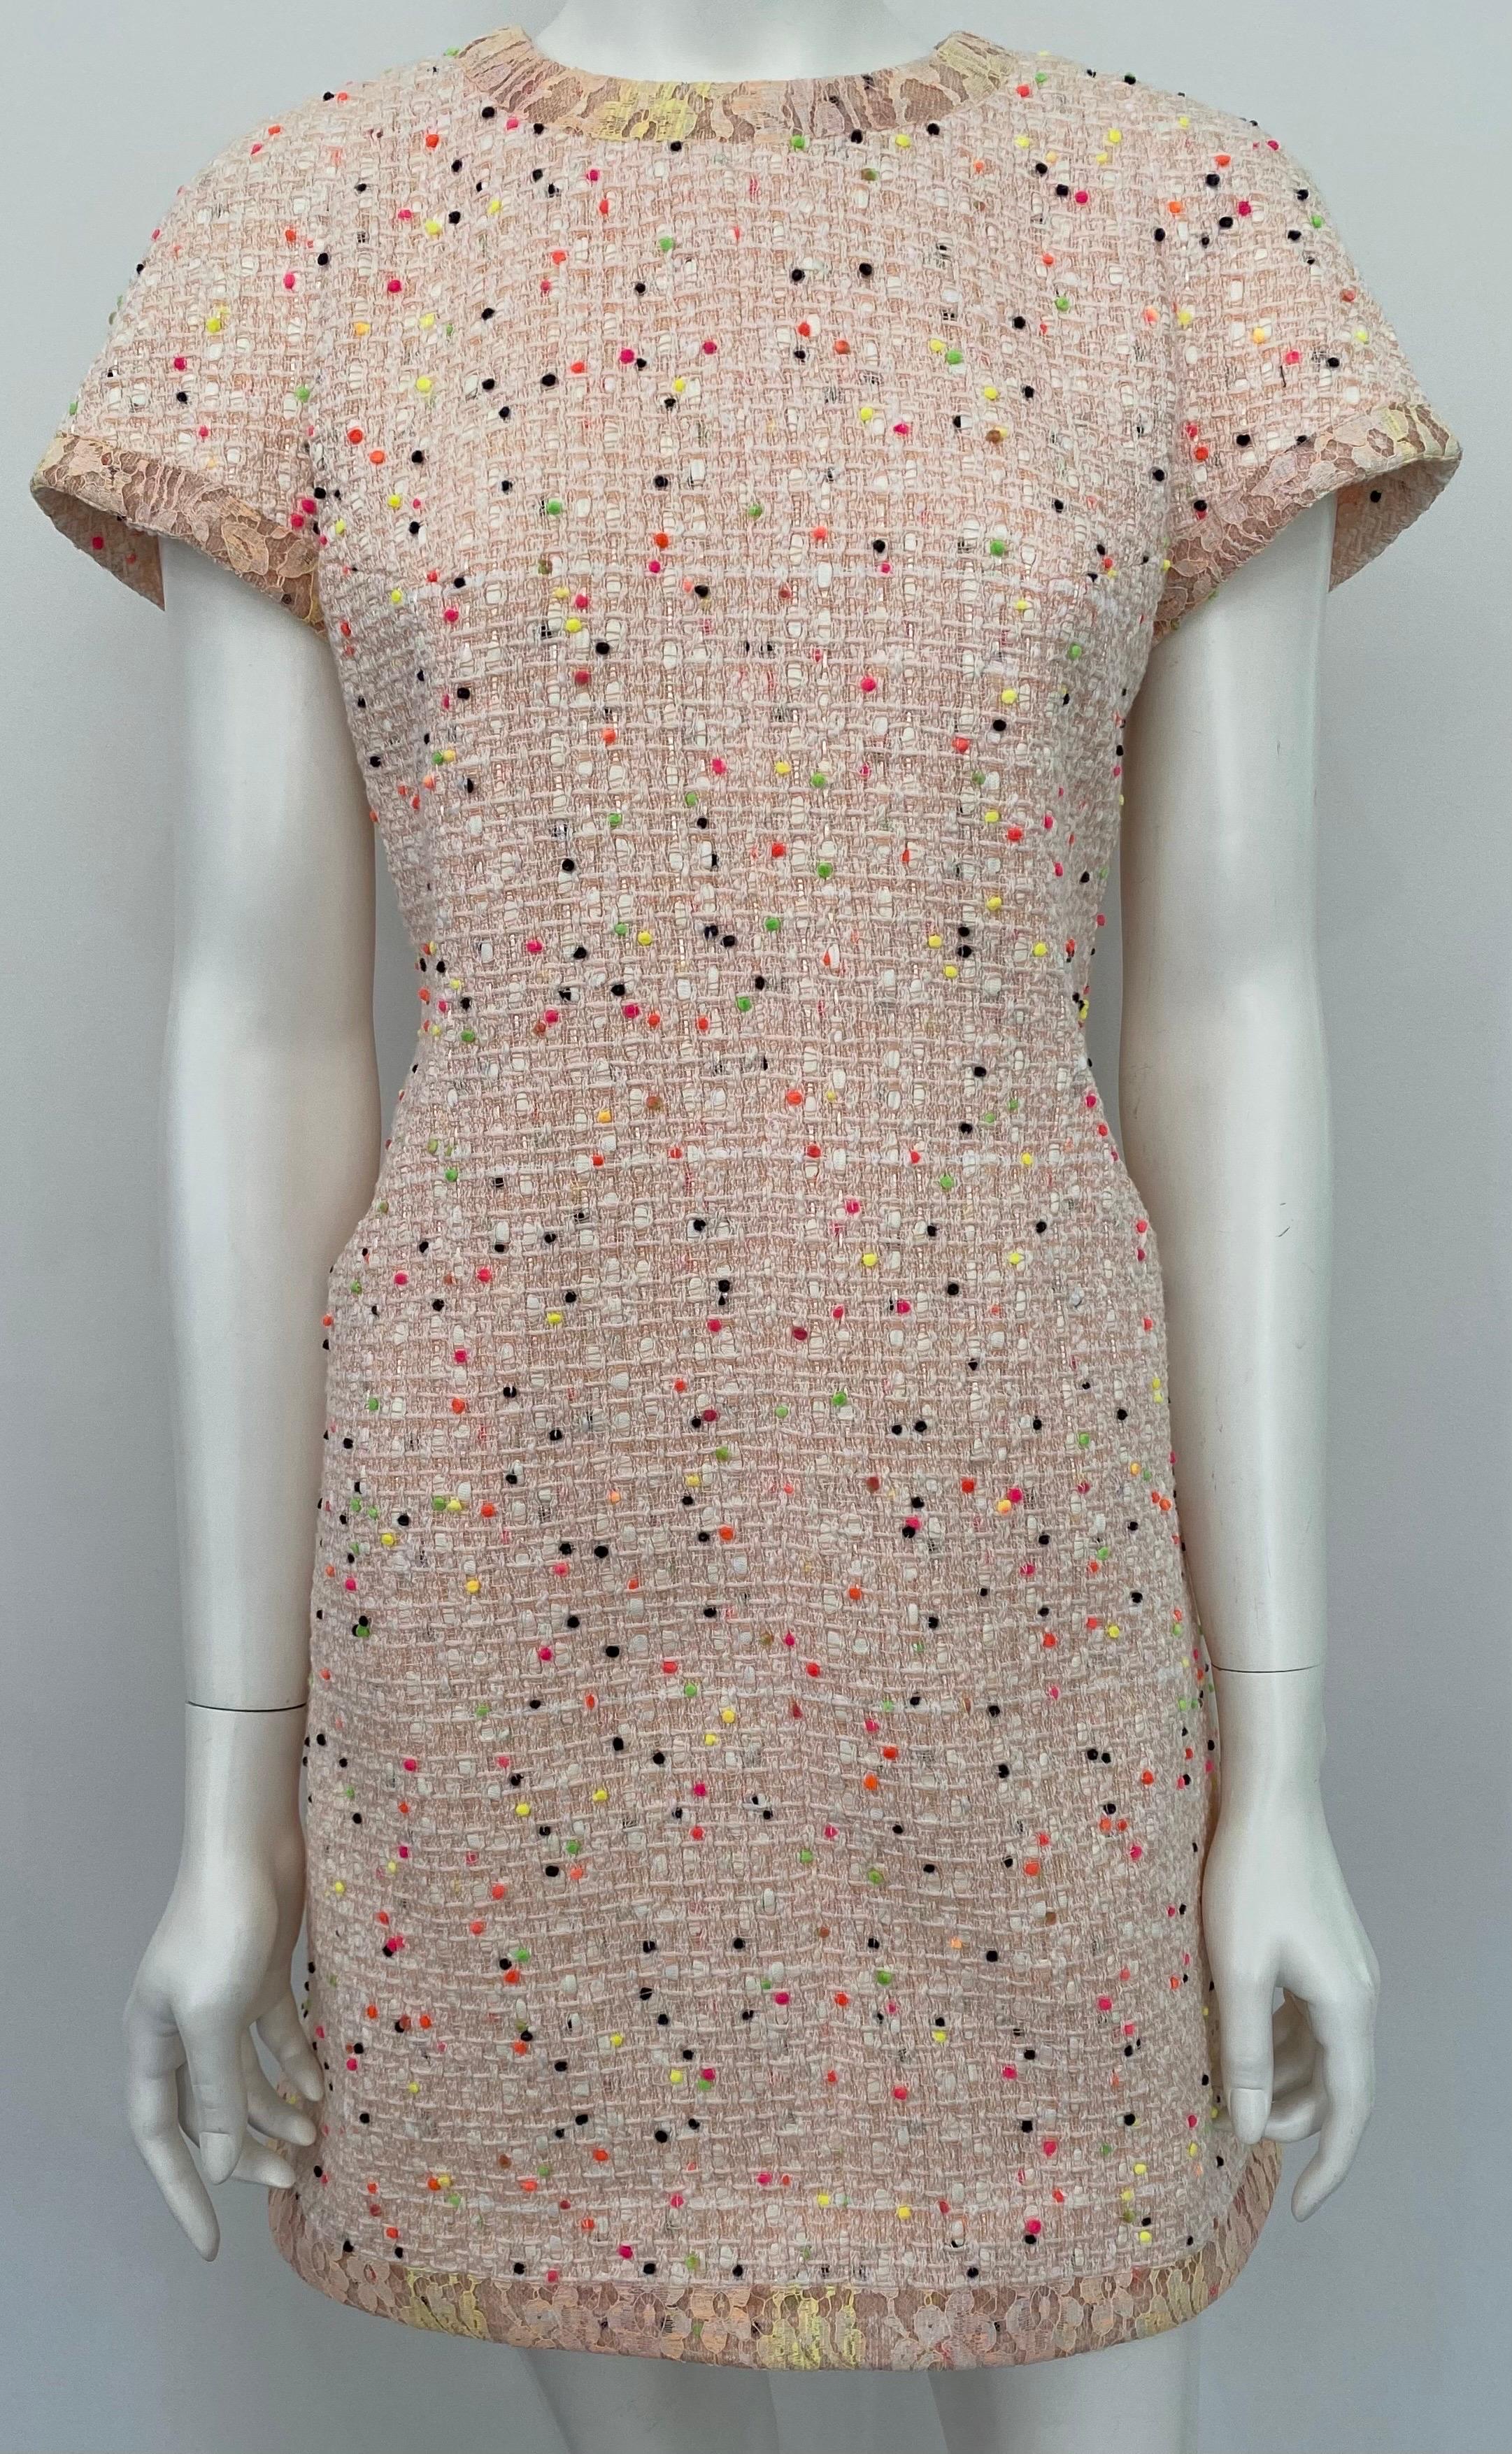 Chanel Peach and multi dot tweed Dress with removable lace detail - Sz 36  This perfect spring dress has a classic Chanel sheath cut, with a round neckline and cap sleeves. The neckline, sleeves and hemline all have a 1” lace overlay border with